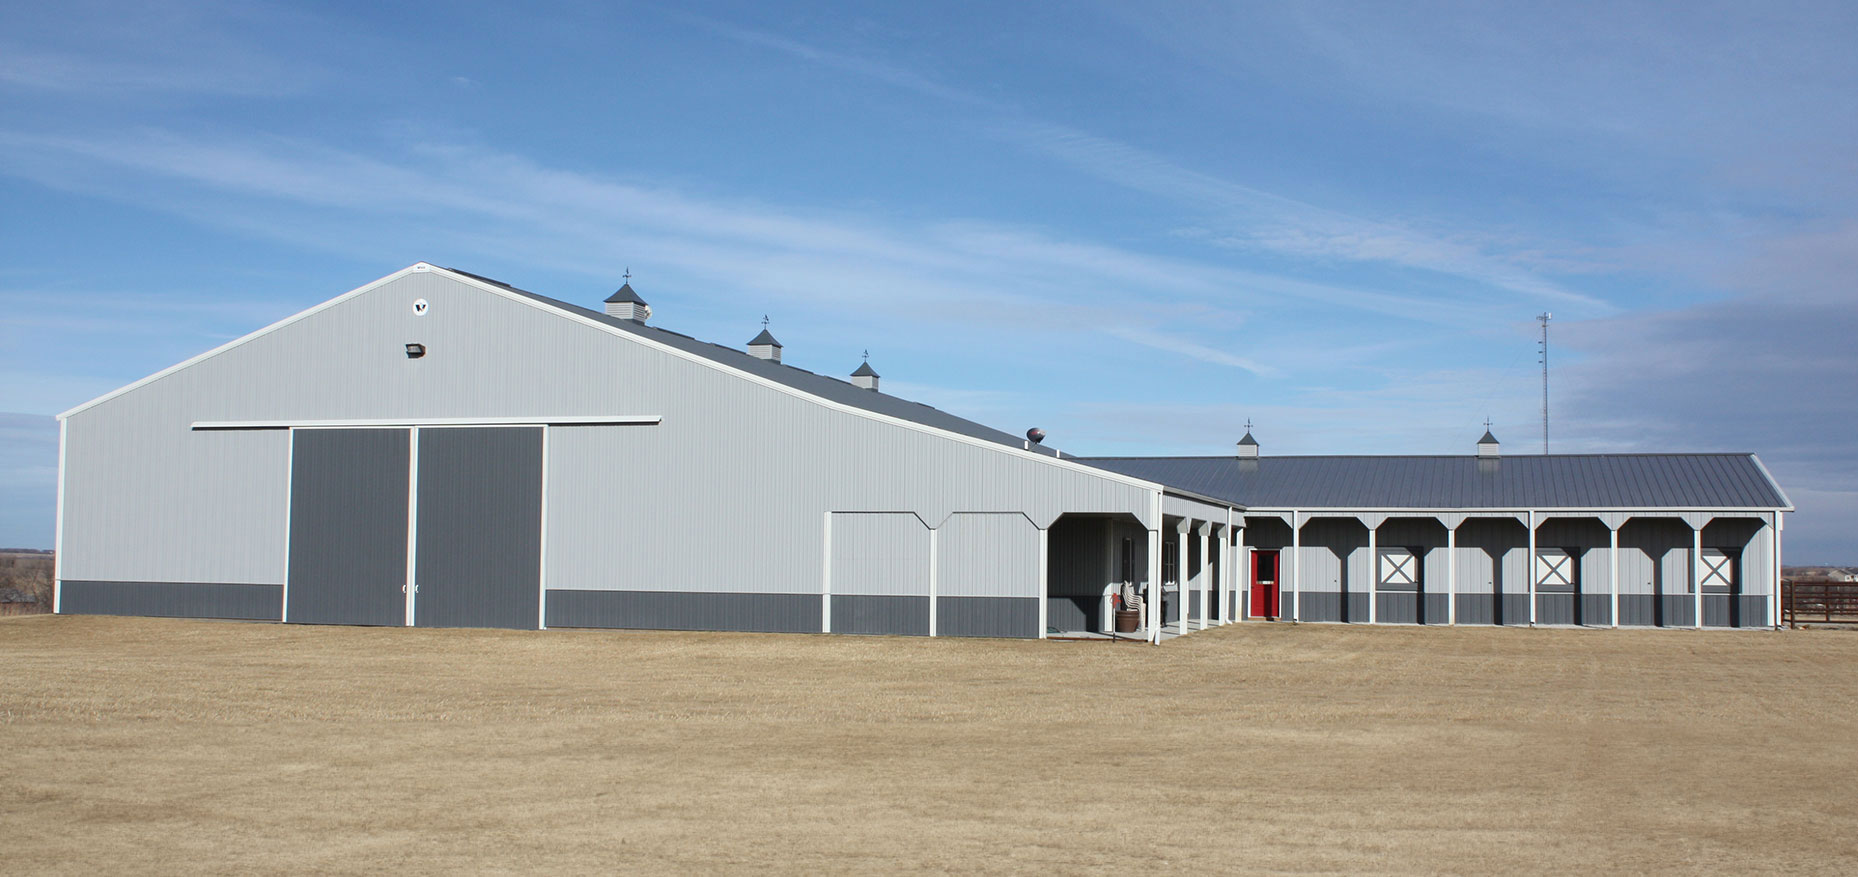 Equestrian Buildings, Horse Barns, Riding Arenas and Stables